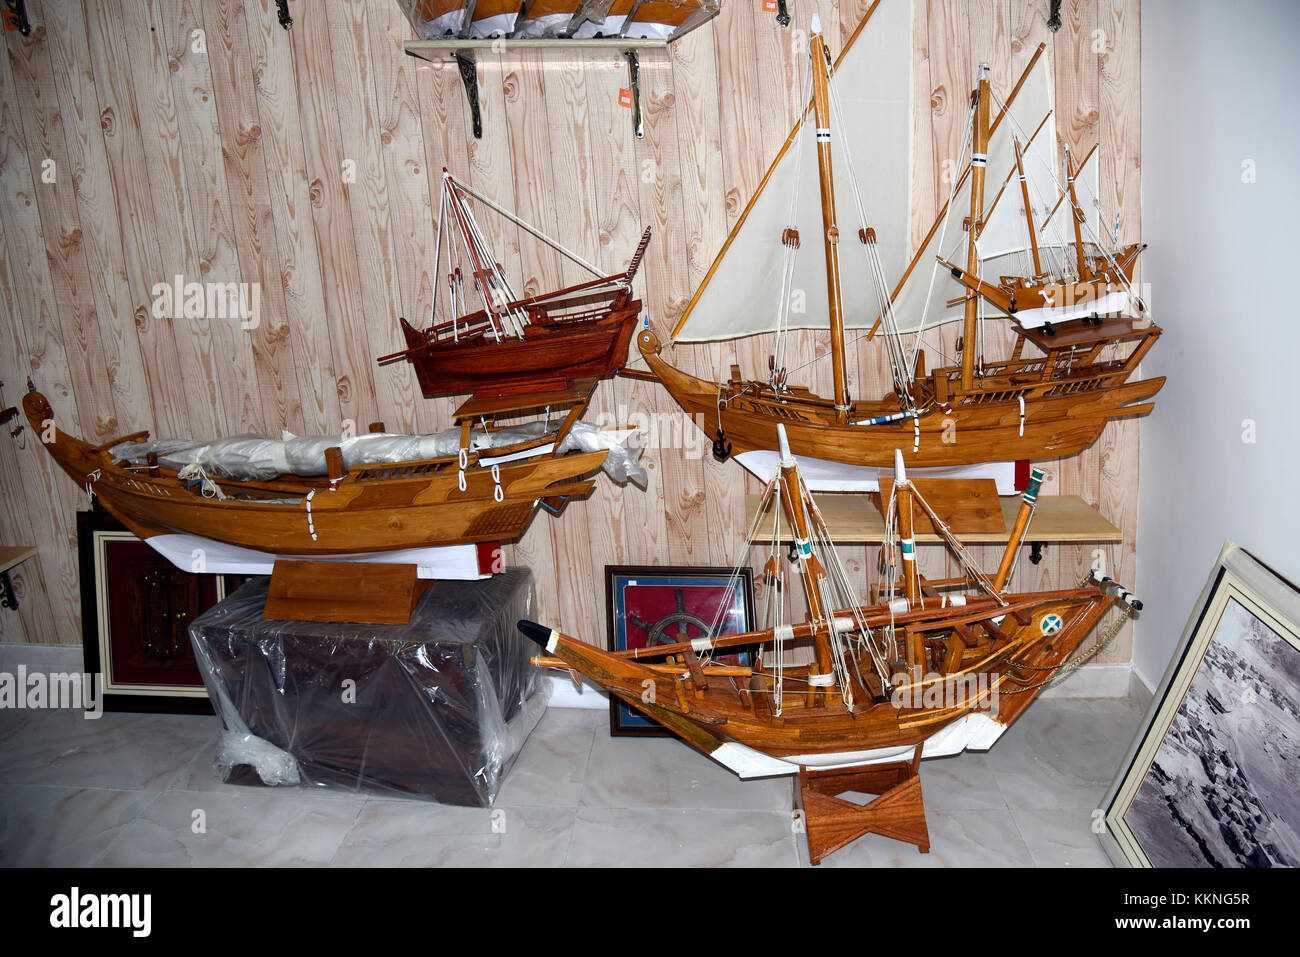 Oman Sur A crafts store with tiny models of dhows or traditional sailing vessels Stock Photo